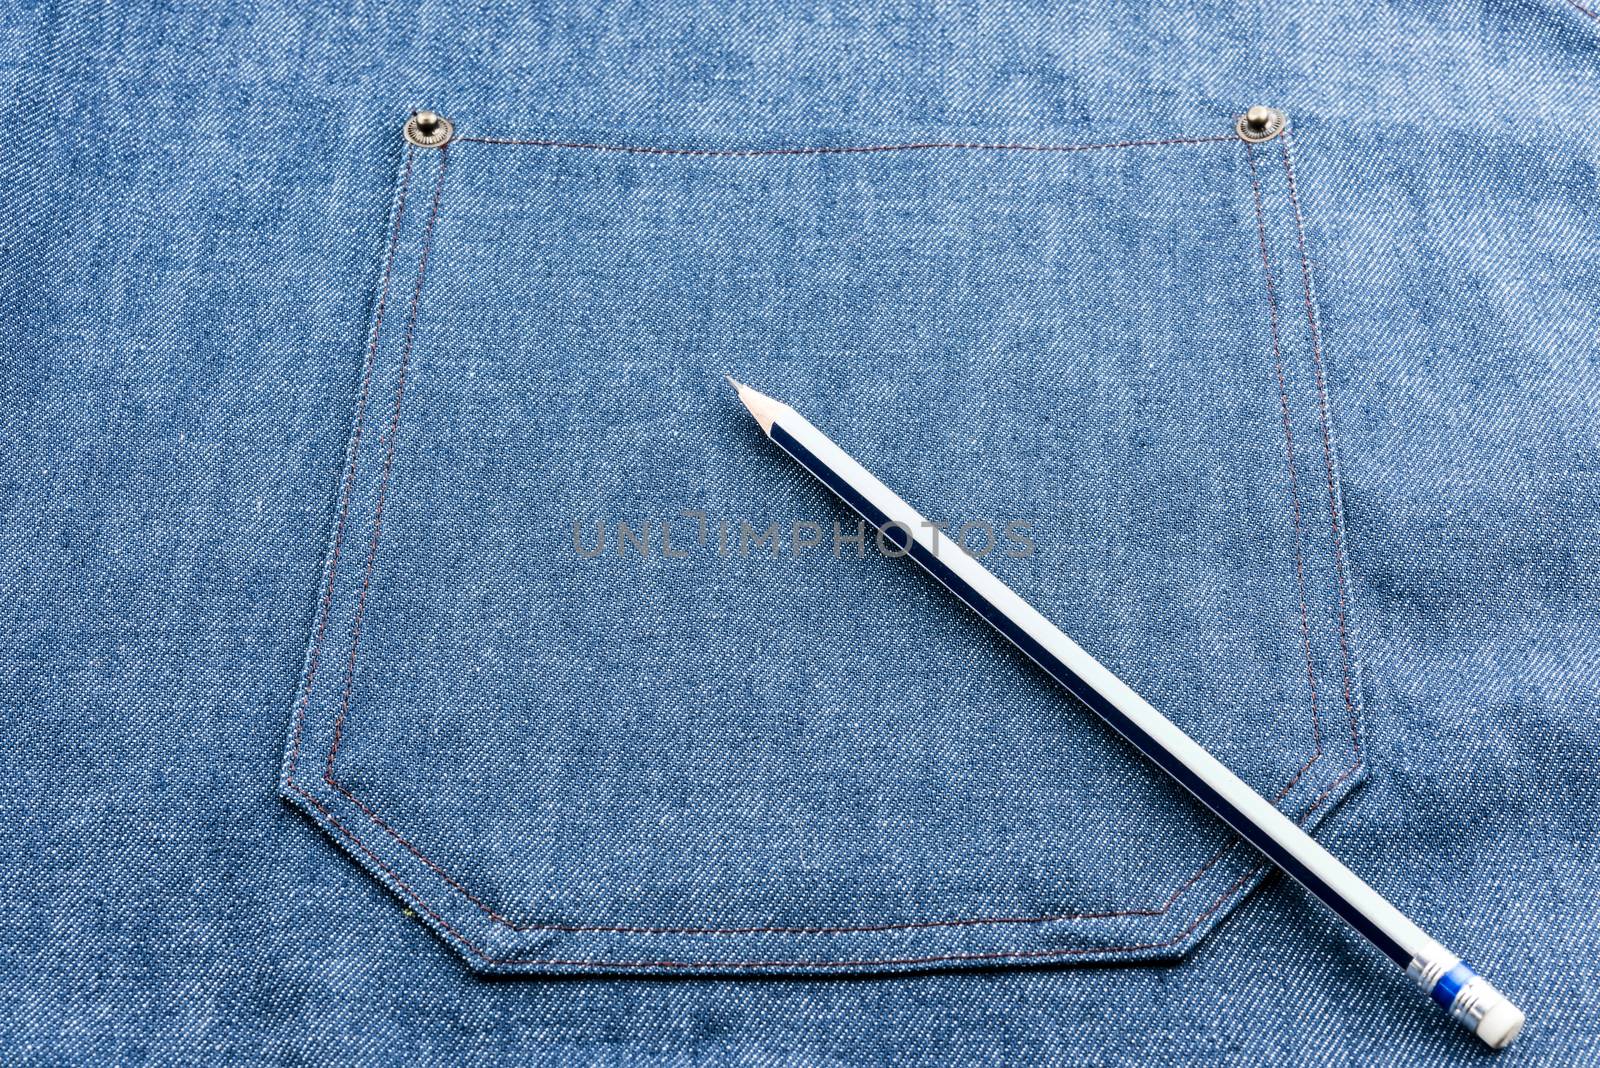 Texture and detail of blue jeans apron for background.